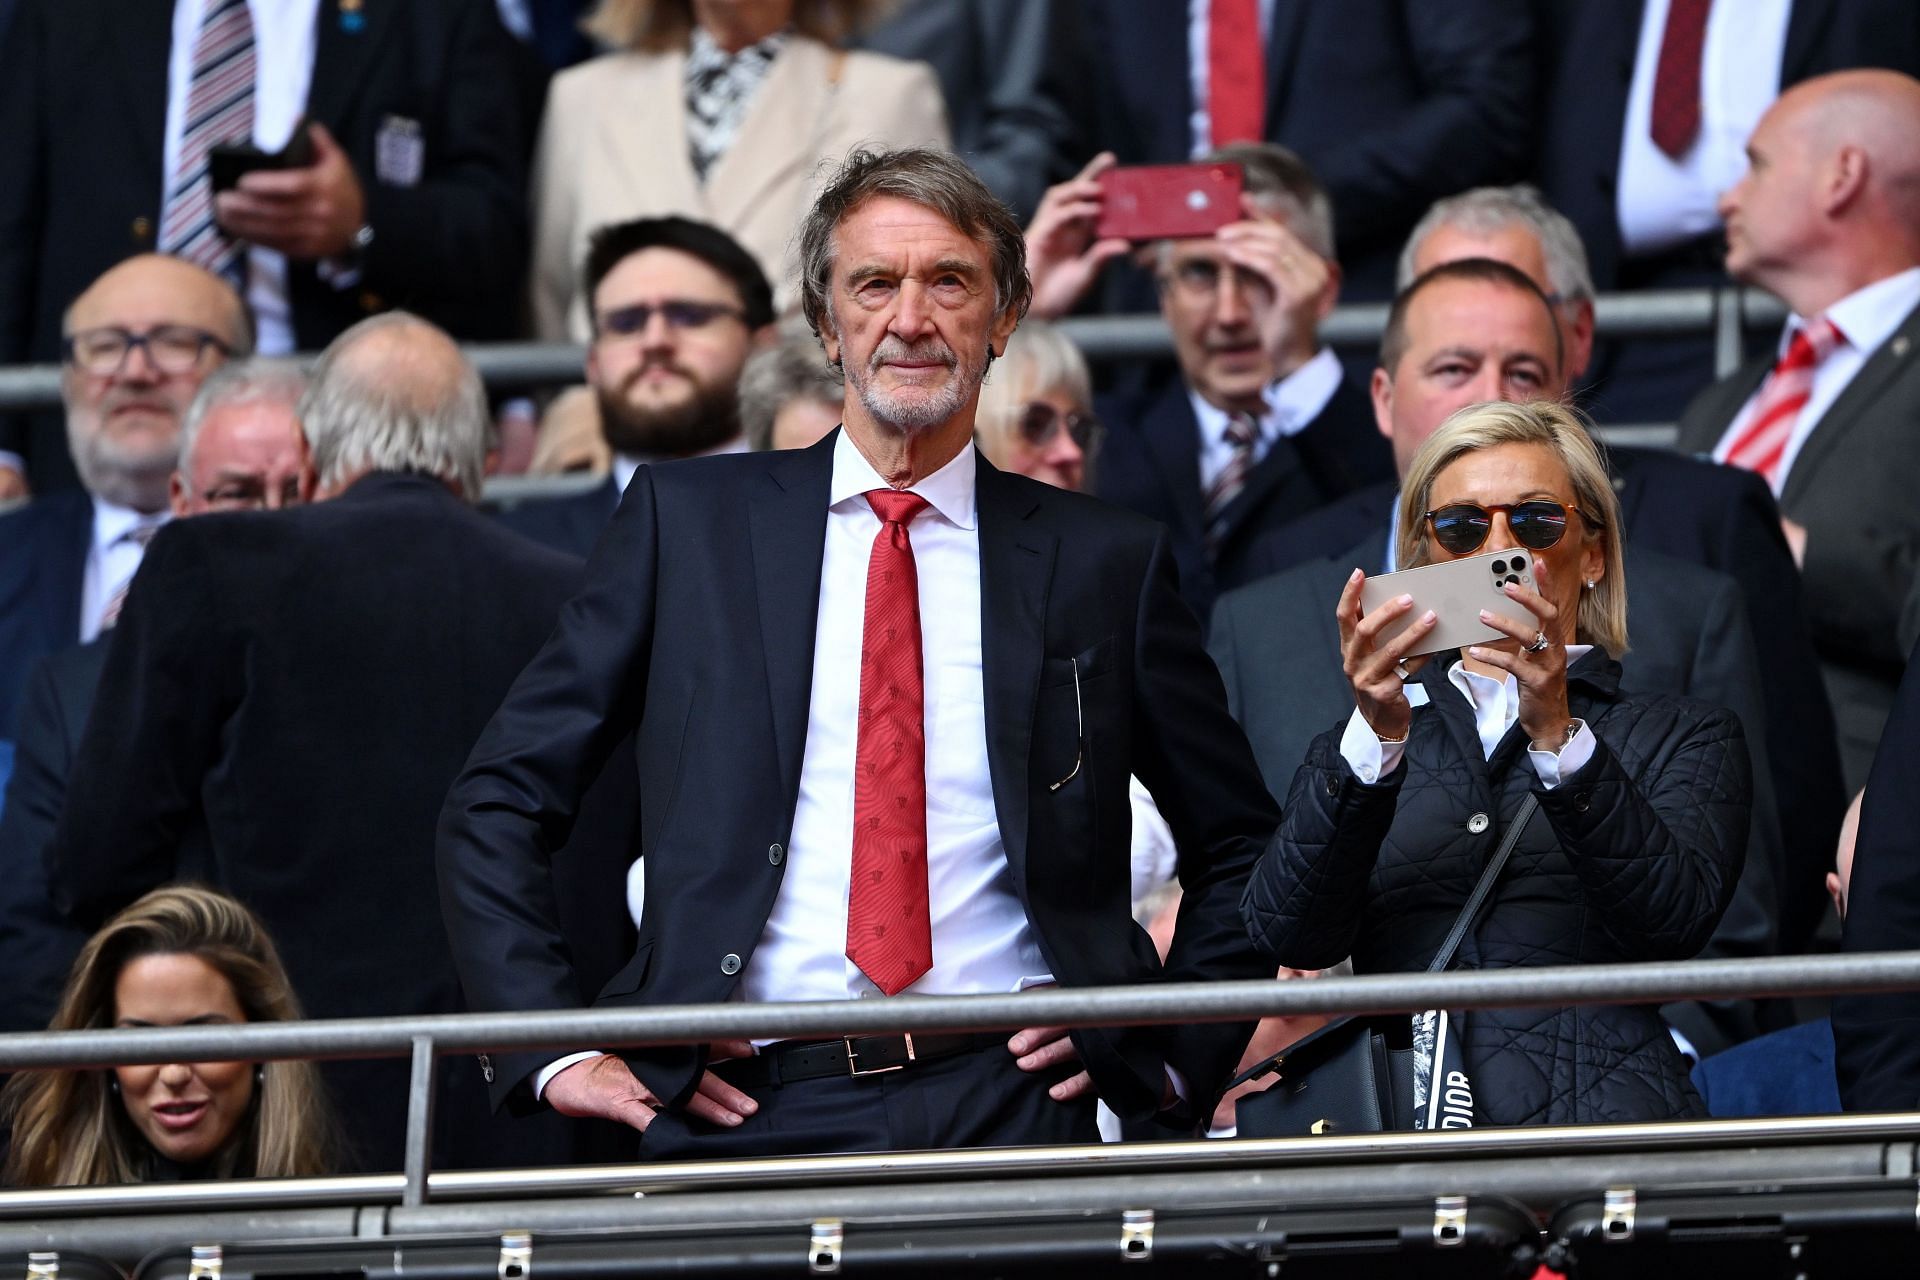 “That’s not fair” - Sir Jim Ratcliffe reacts to Manchester United being barred from signing French international